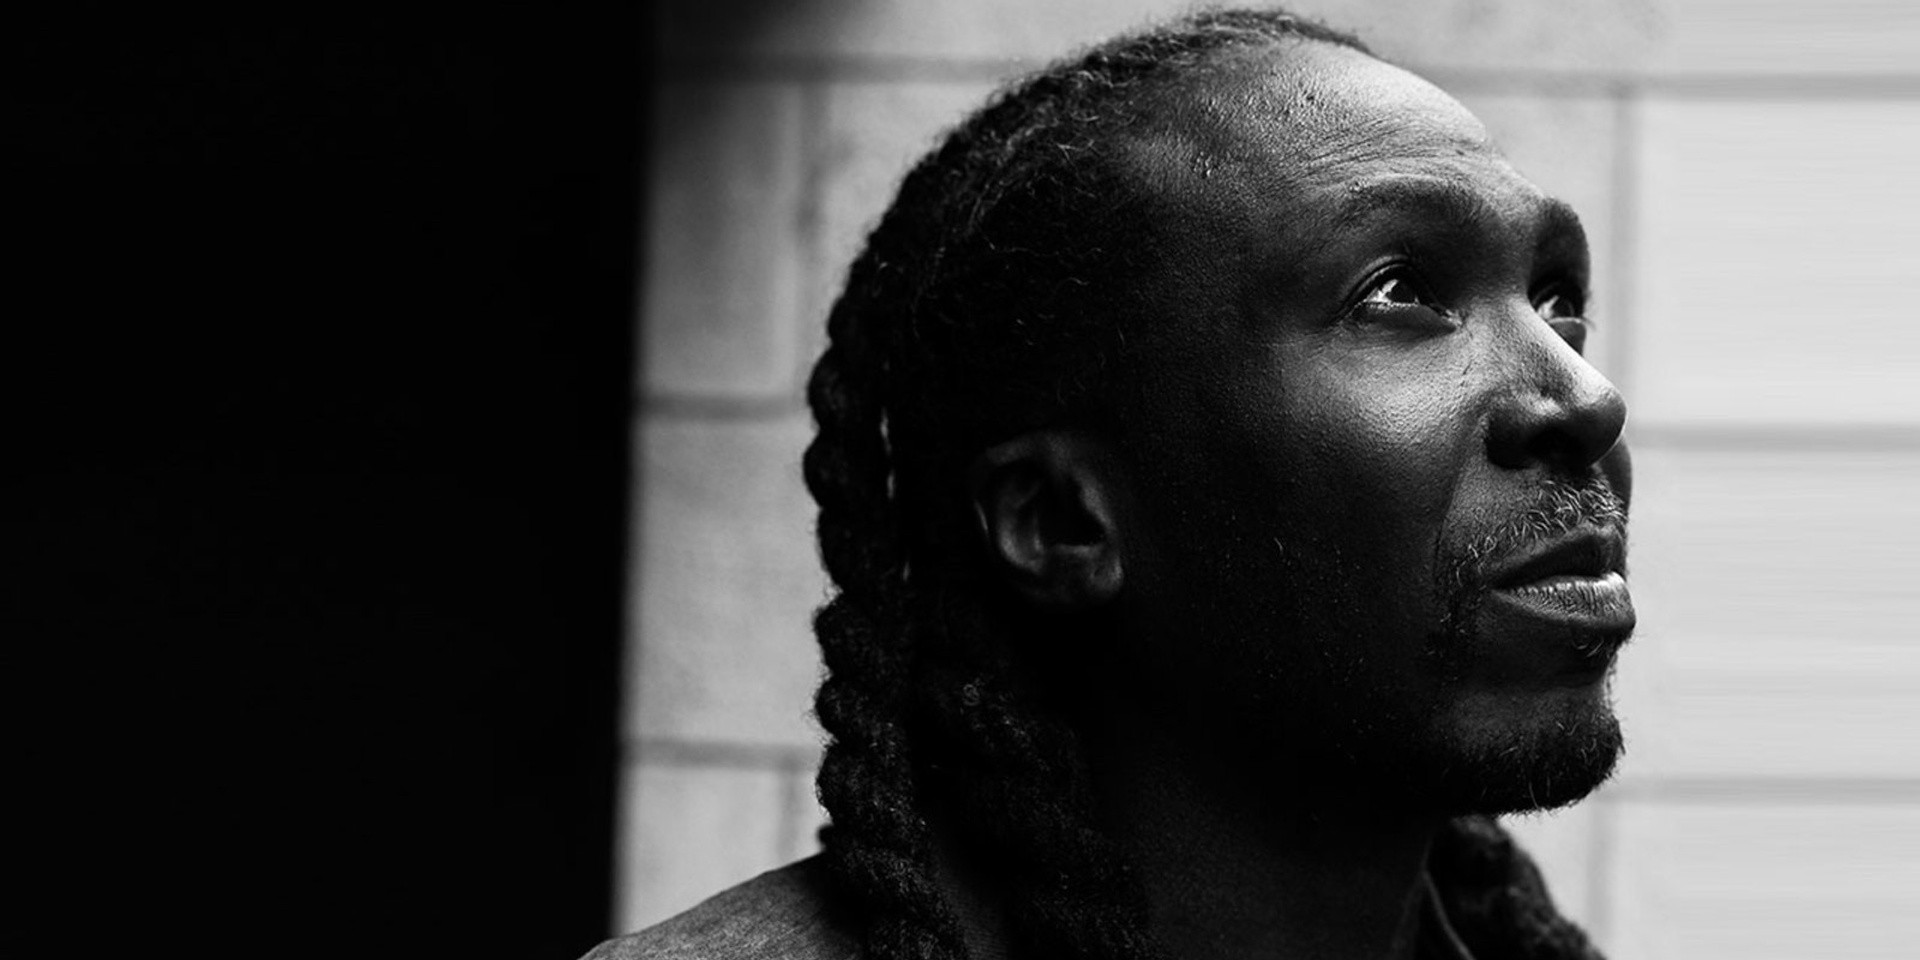 Footwork pioneer RP Boo to make his Singapore debut